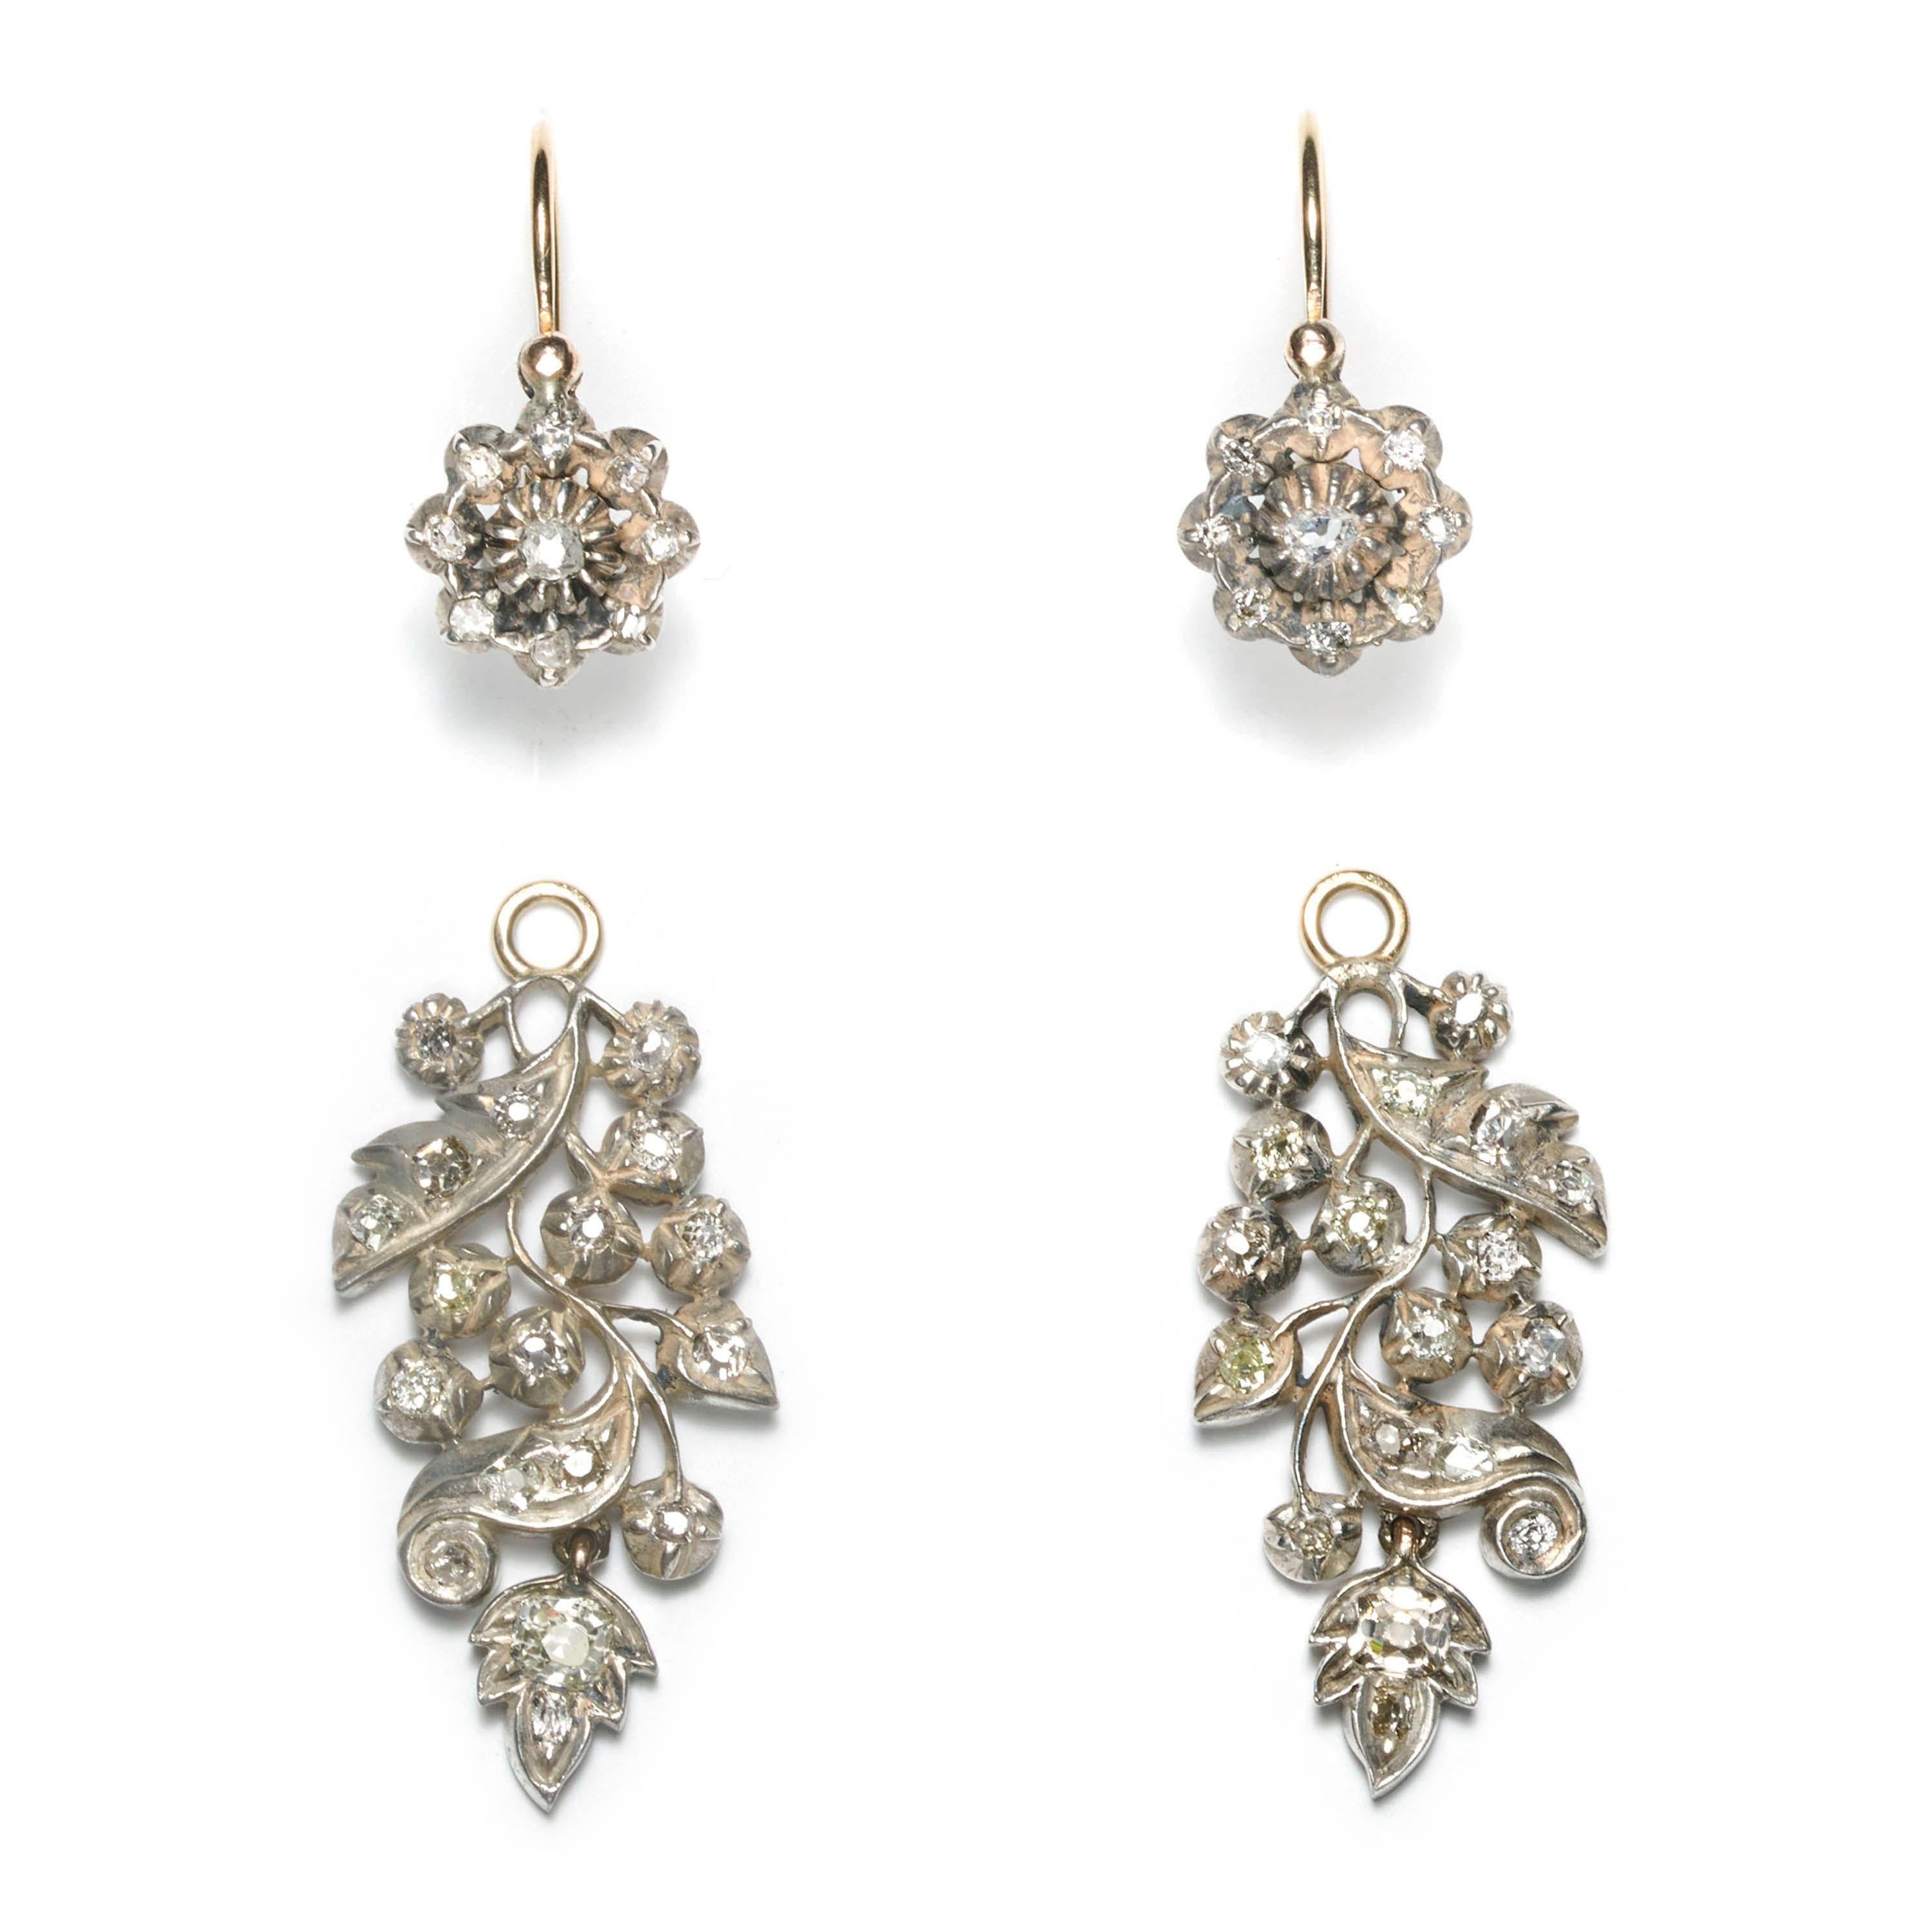 A pair of antique diamond and silver-upon-gold drop earrings. The tops have an old-cut diamond in each centre, in a heavy claw setting, with eight, surrounding old mine-cut diamonds, in cut down settings; the drops are set with old mine-cut